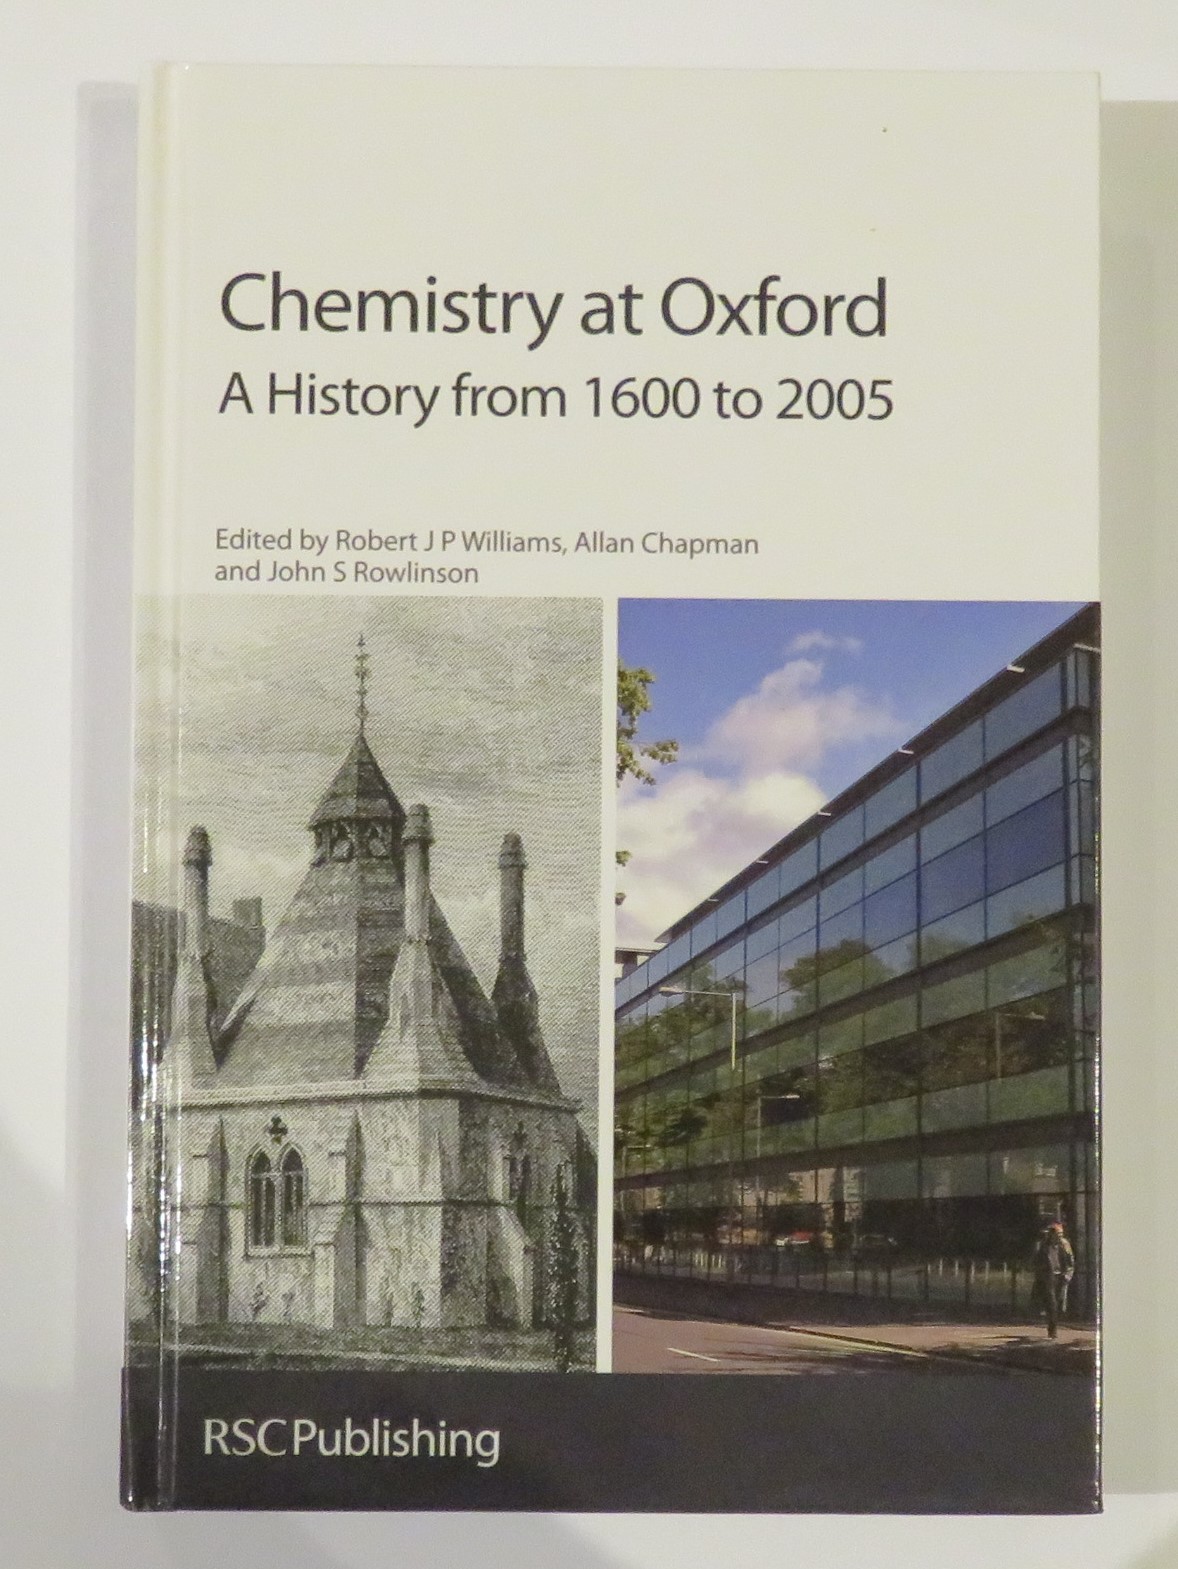 Chemistry at Oxford: A History from 1600 to 2005